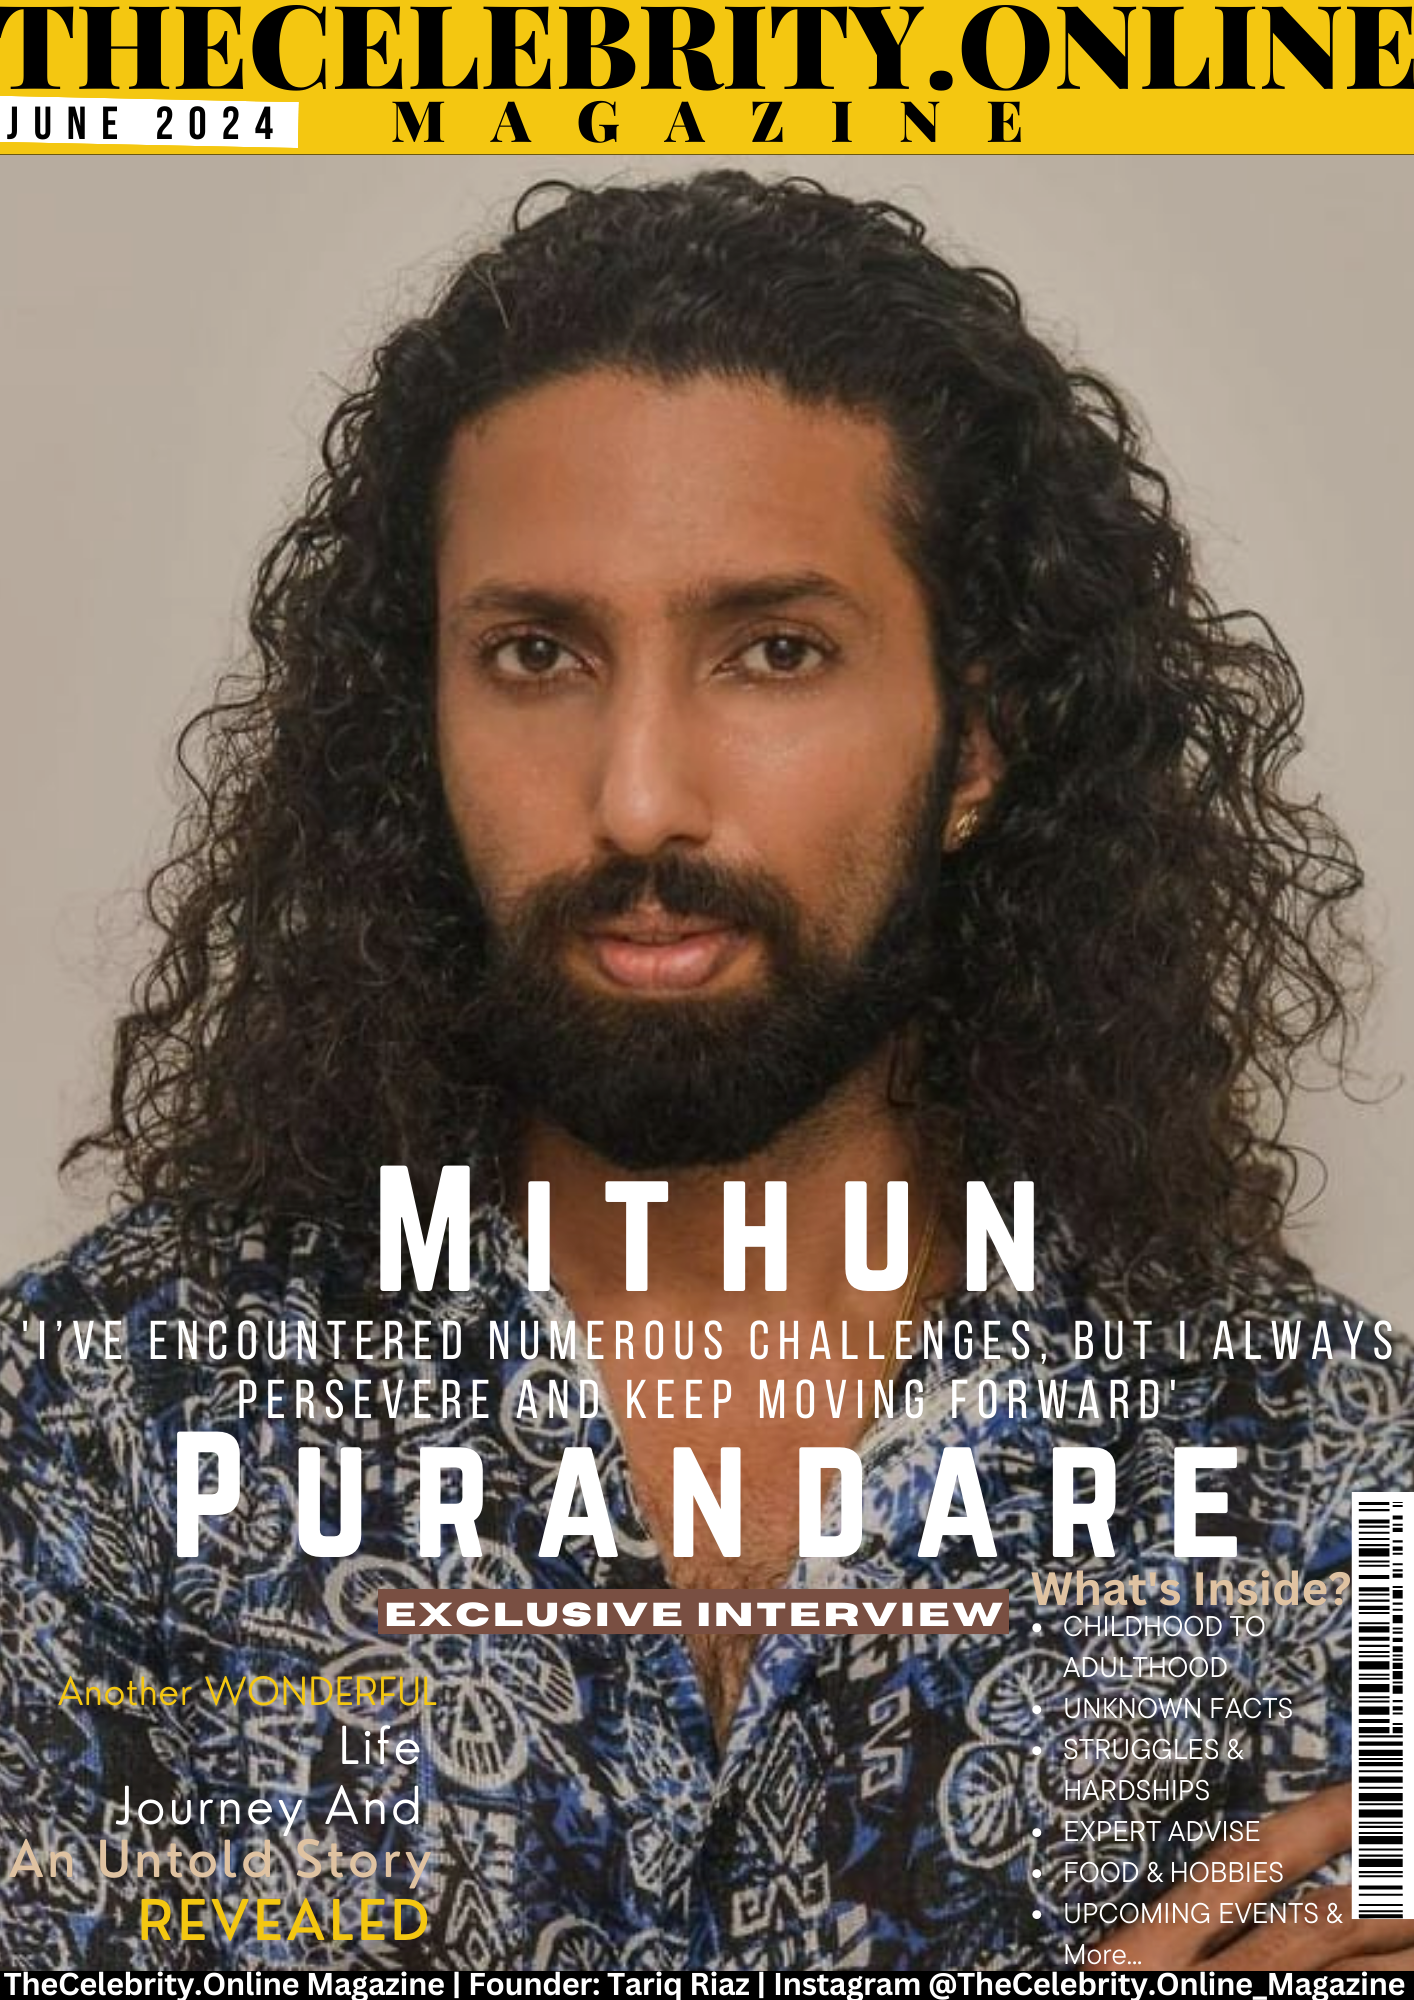 Mithun Purandare Exclusive Interview – ‘I’ve Encountered Numerous Challenges, But I Always Persevere And Keep Moving Forward’